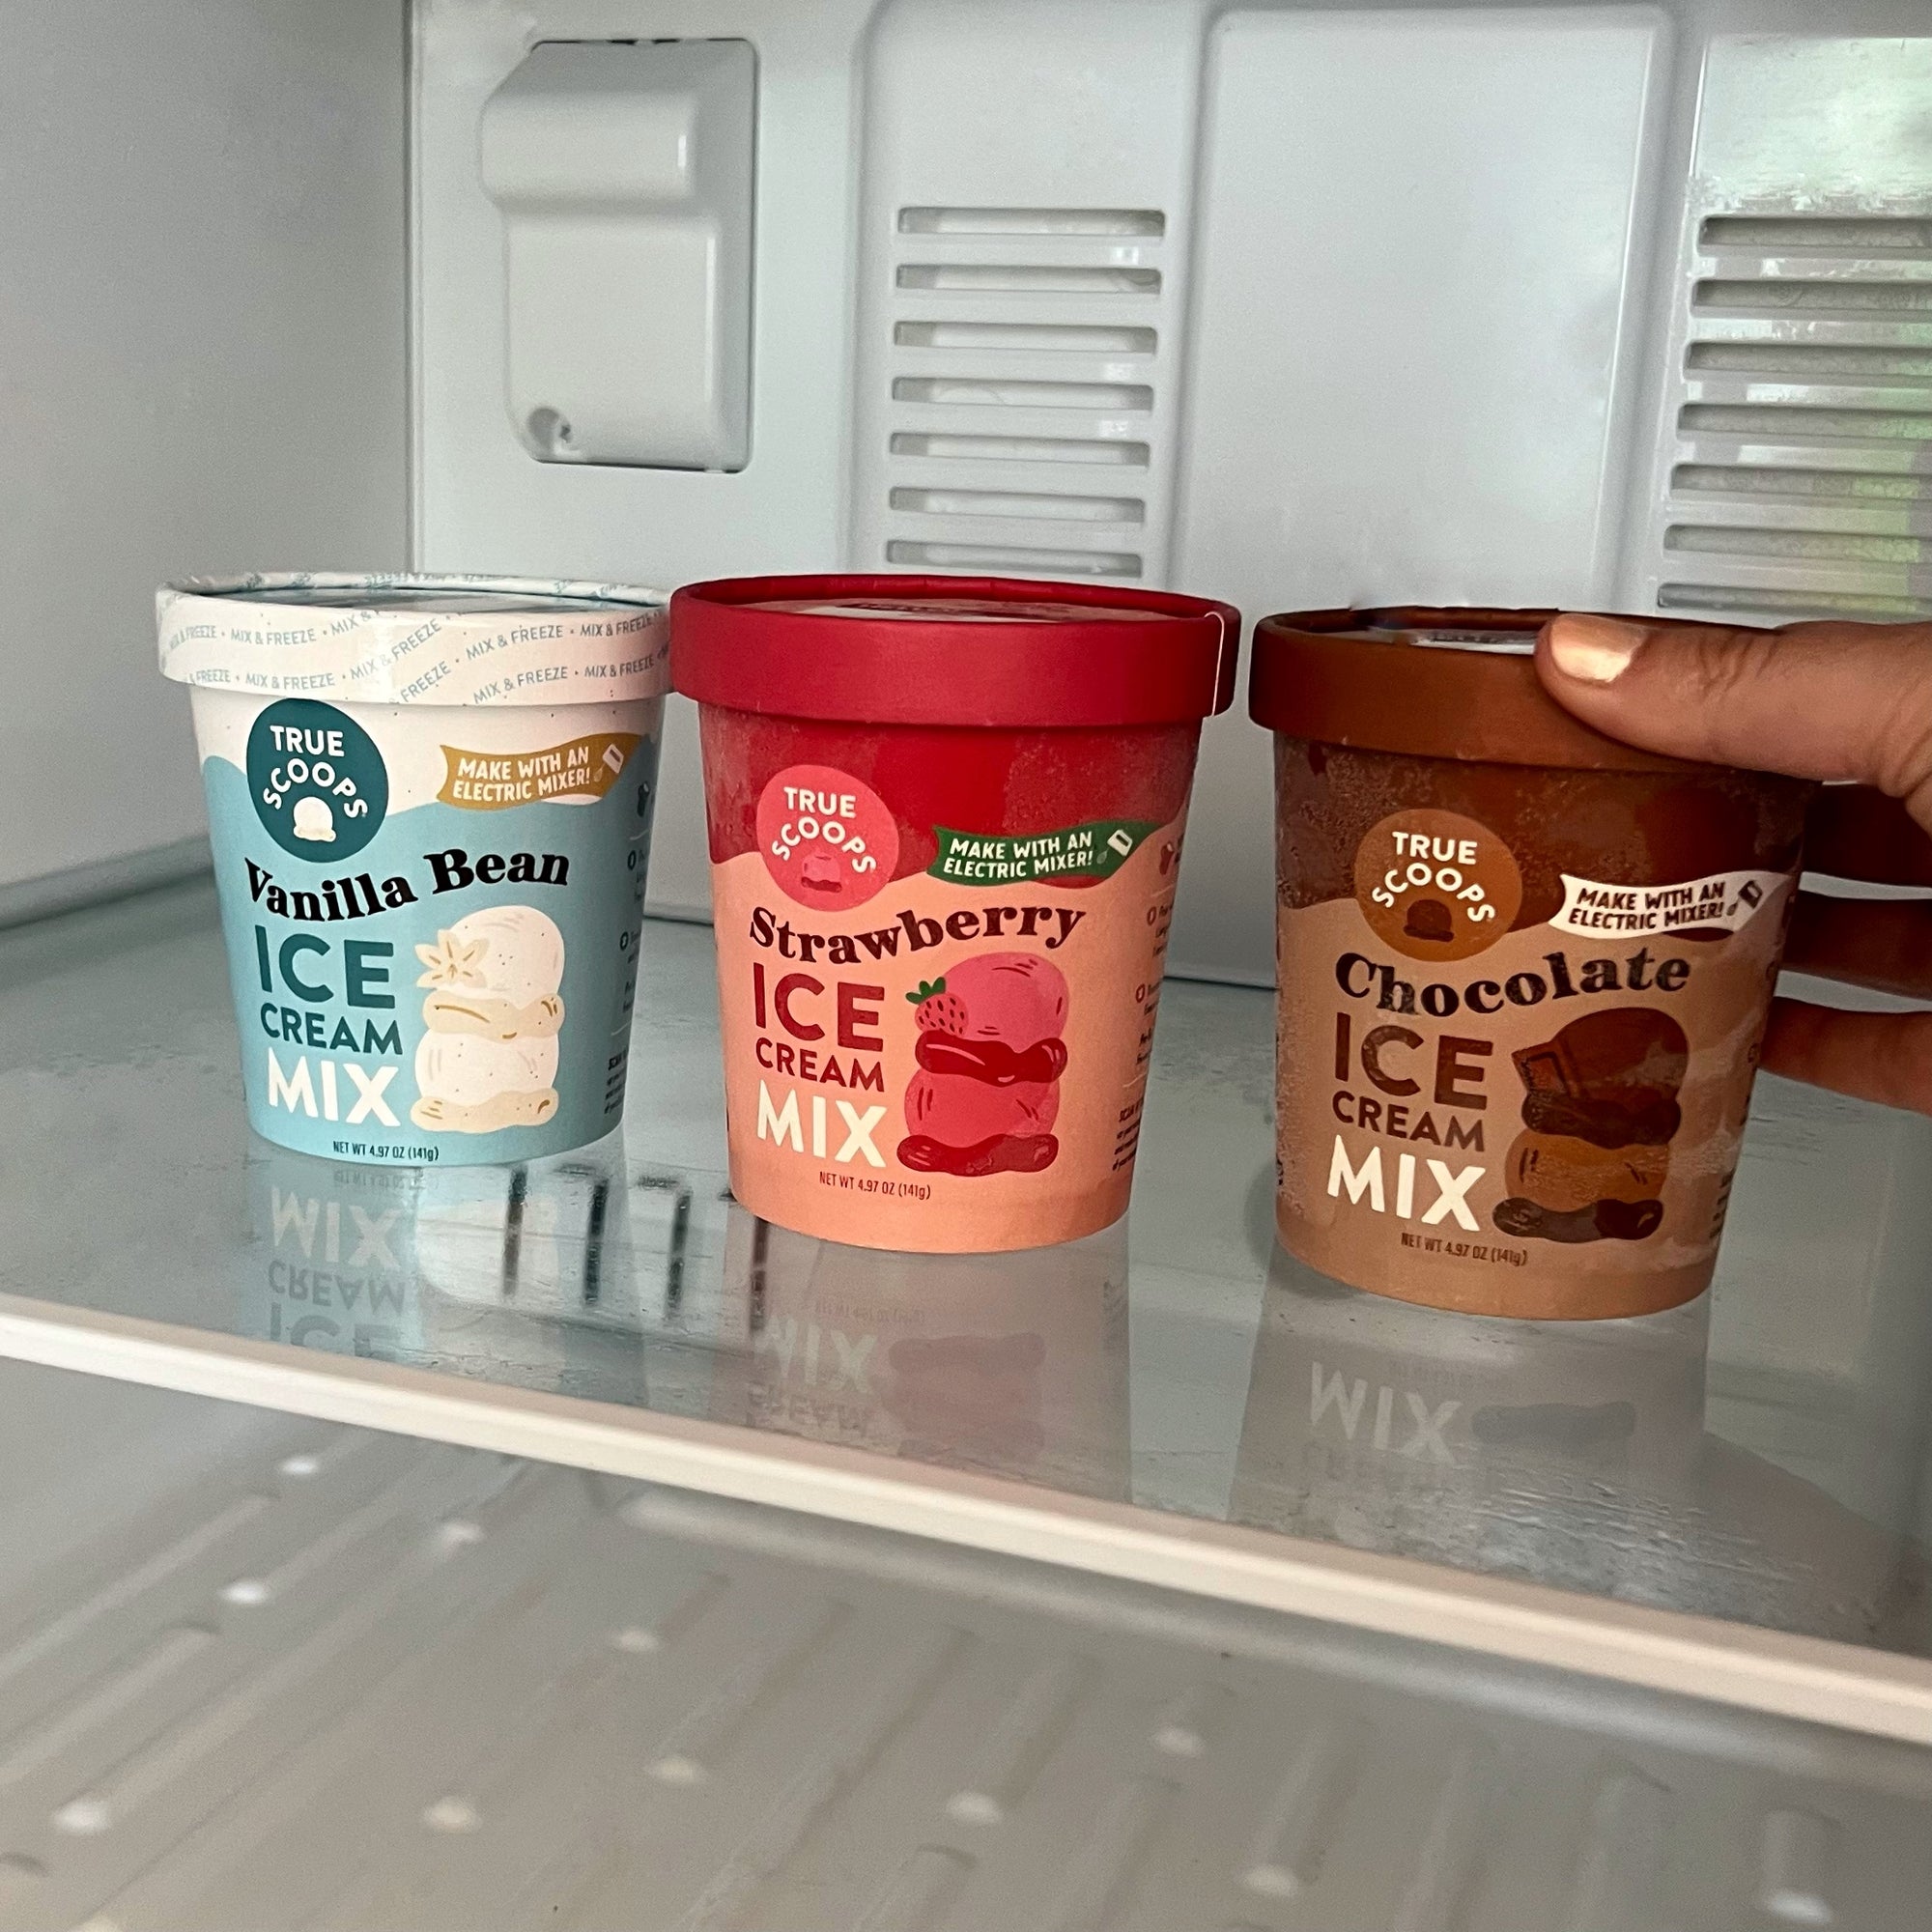 Cut Your Ice Cream Container Down As You Eat It To Prevent Freezer